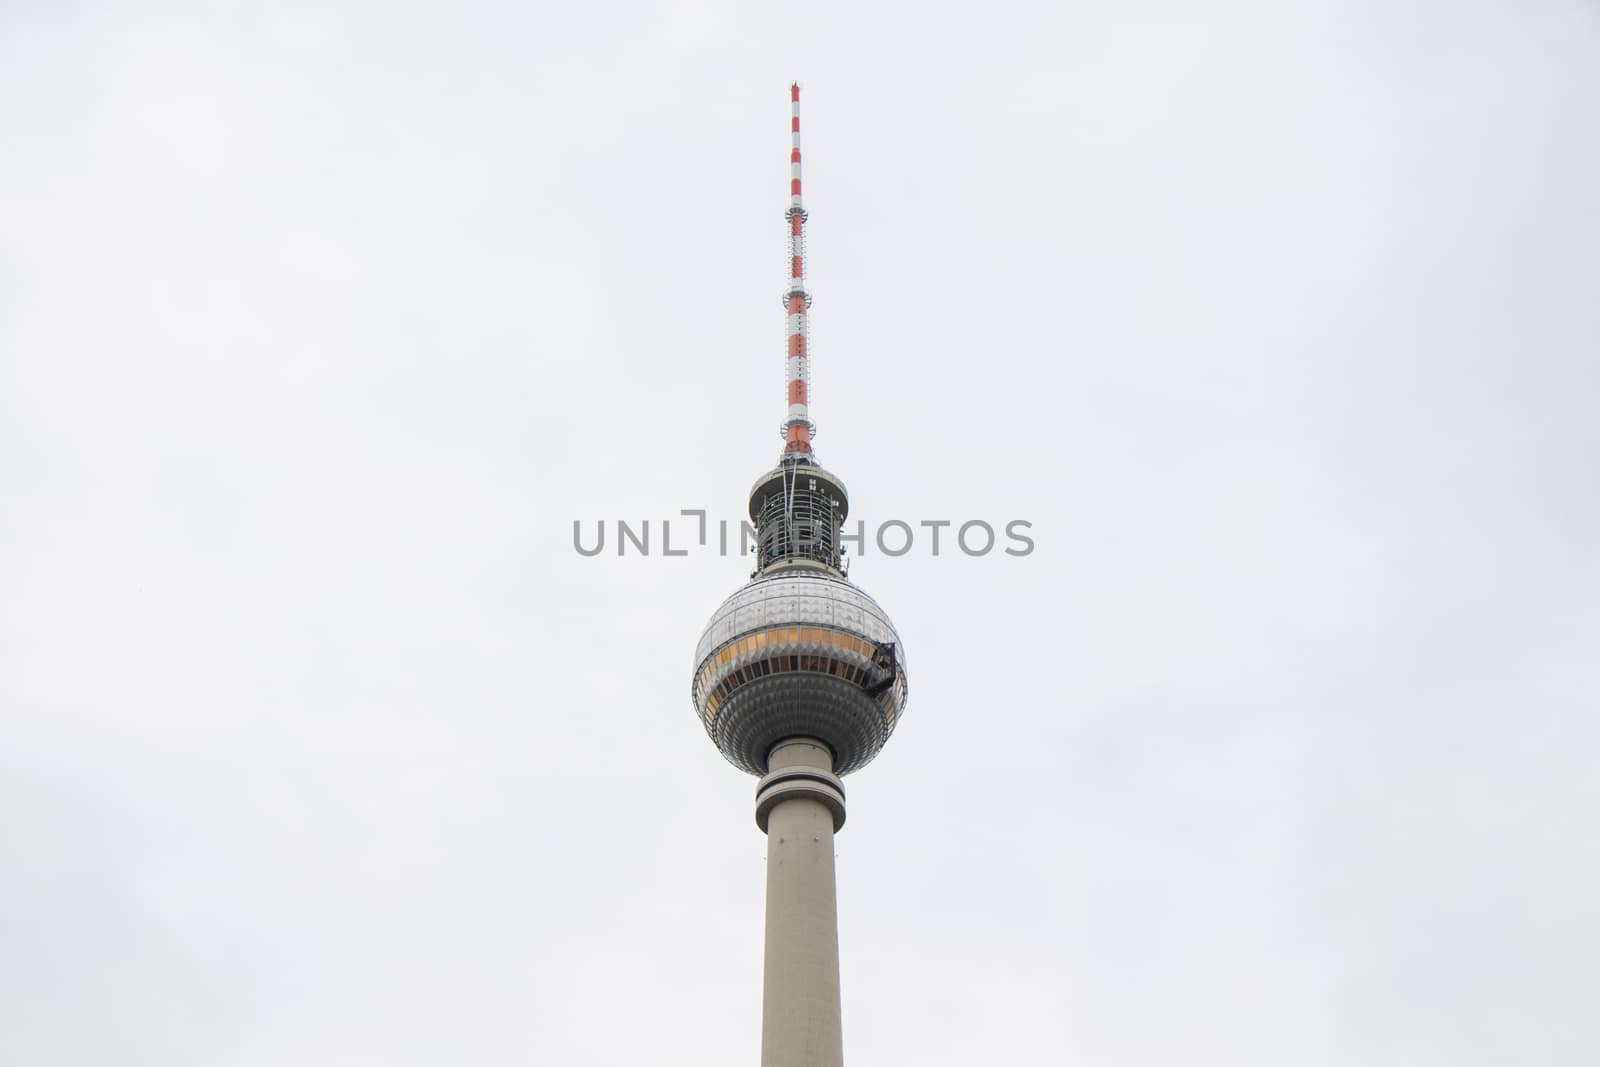 BERLIN, GERMANY - OCTOBER 11, 2017: Berlin TV tower on the white background.